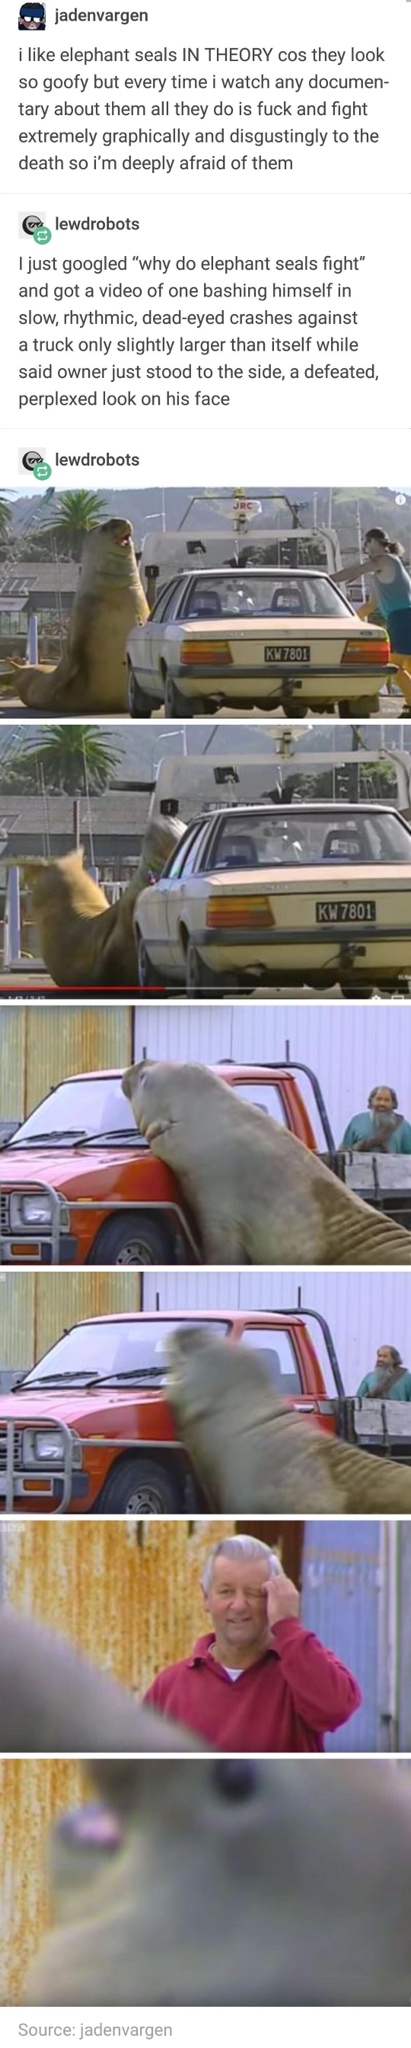 boat - jadenvargen i elephant seals In Theory cos they look so goofy but every time i watch any documen tary about them all they do is fuck and fight extremely graphically and disgustingly to the death so i'm deeply afraid of them e lewdrobots I just goog